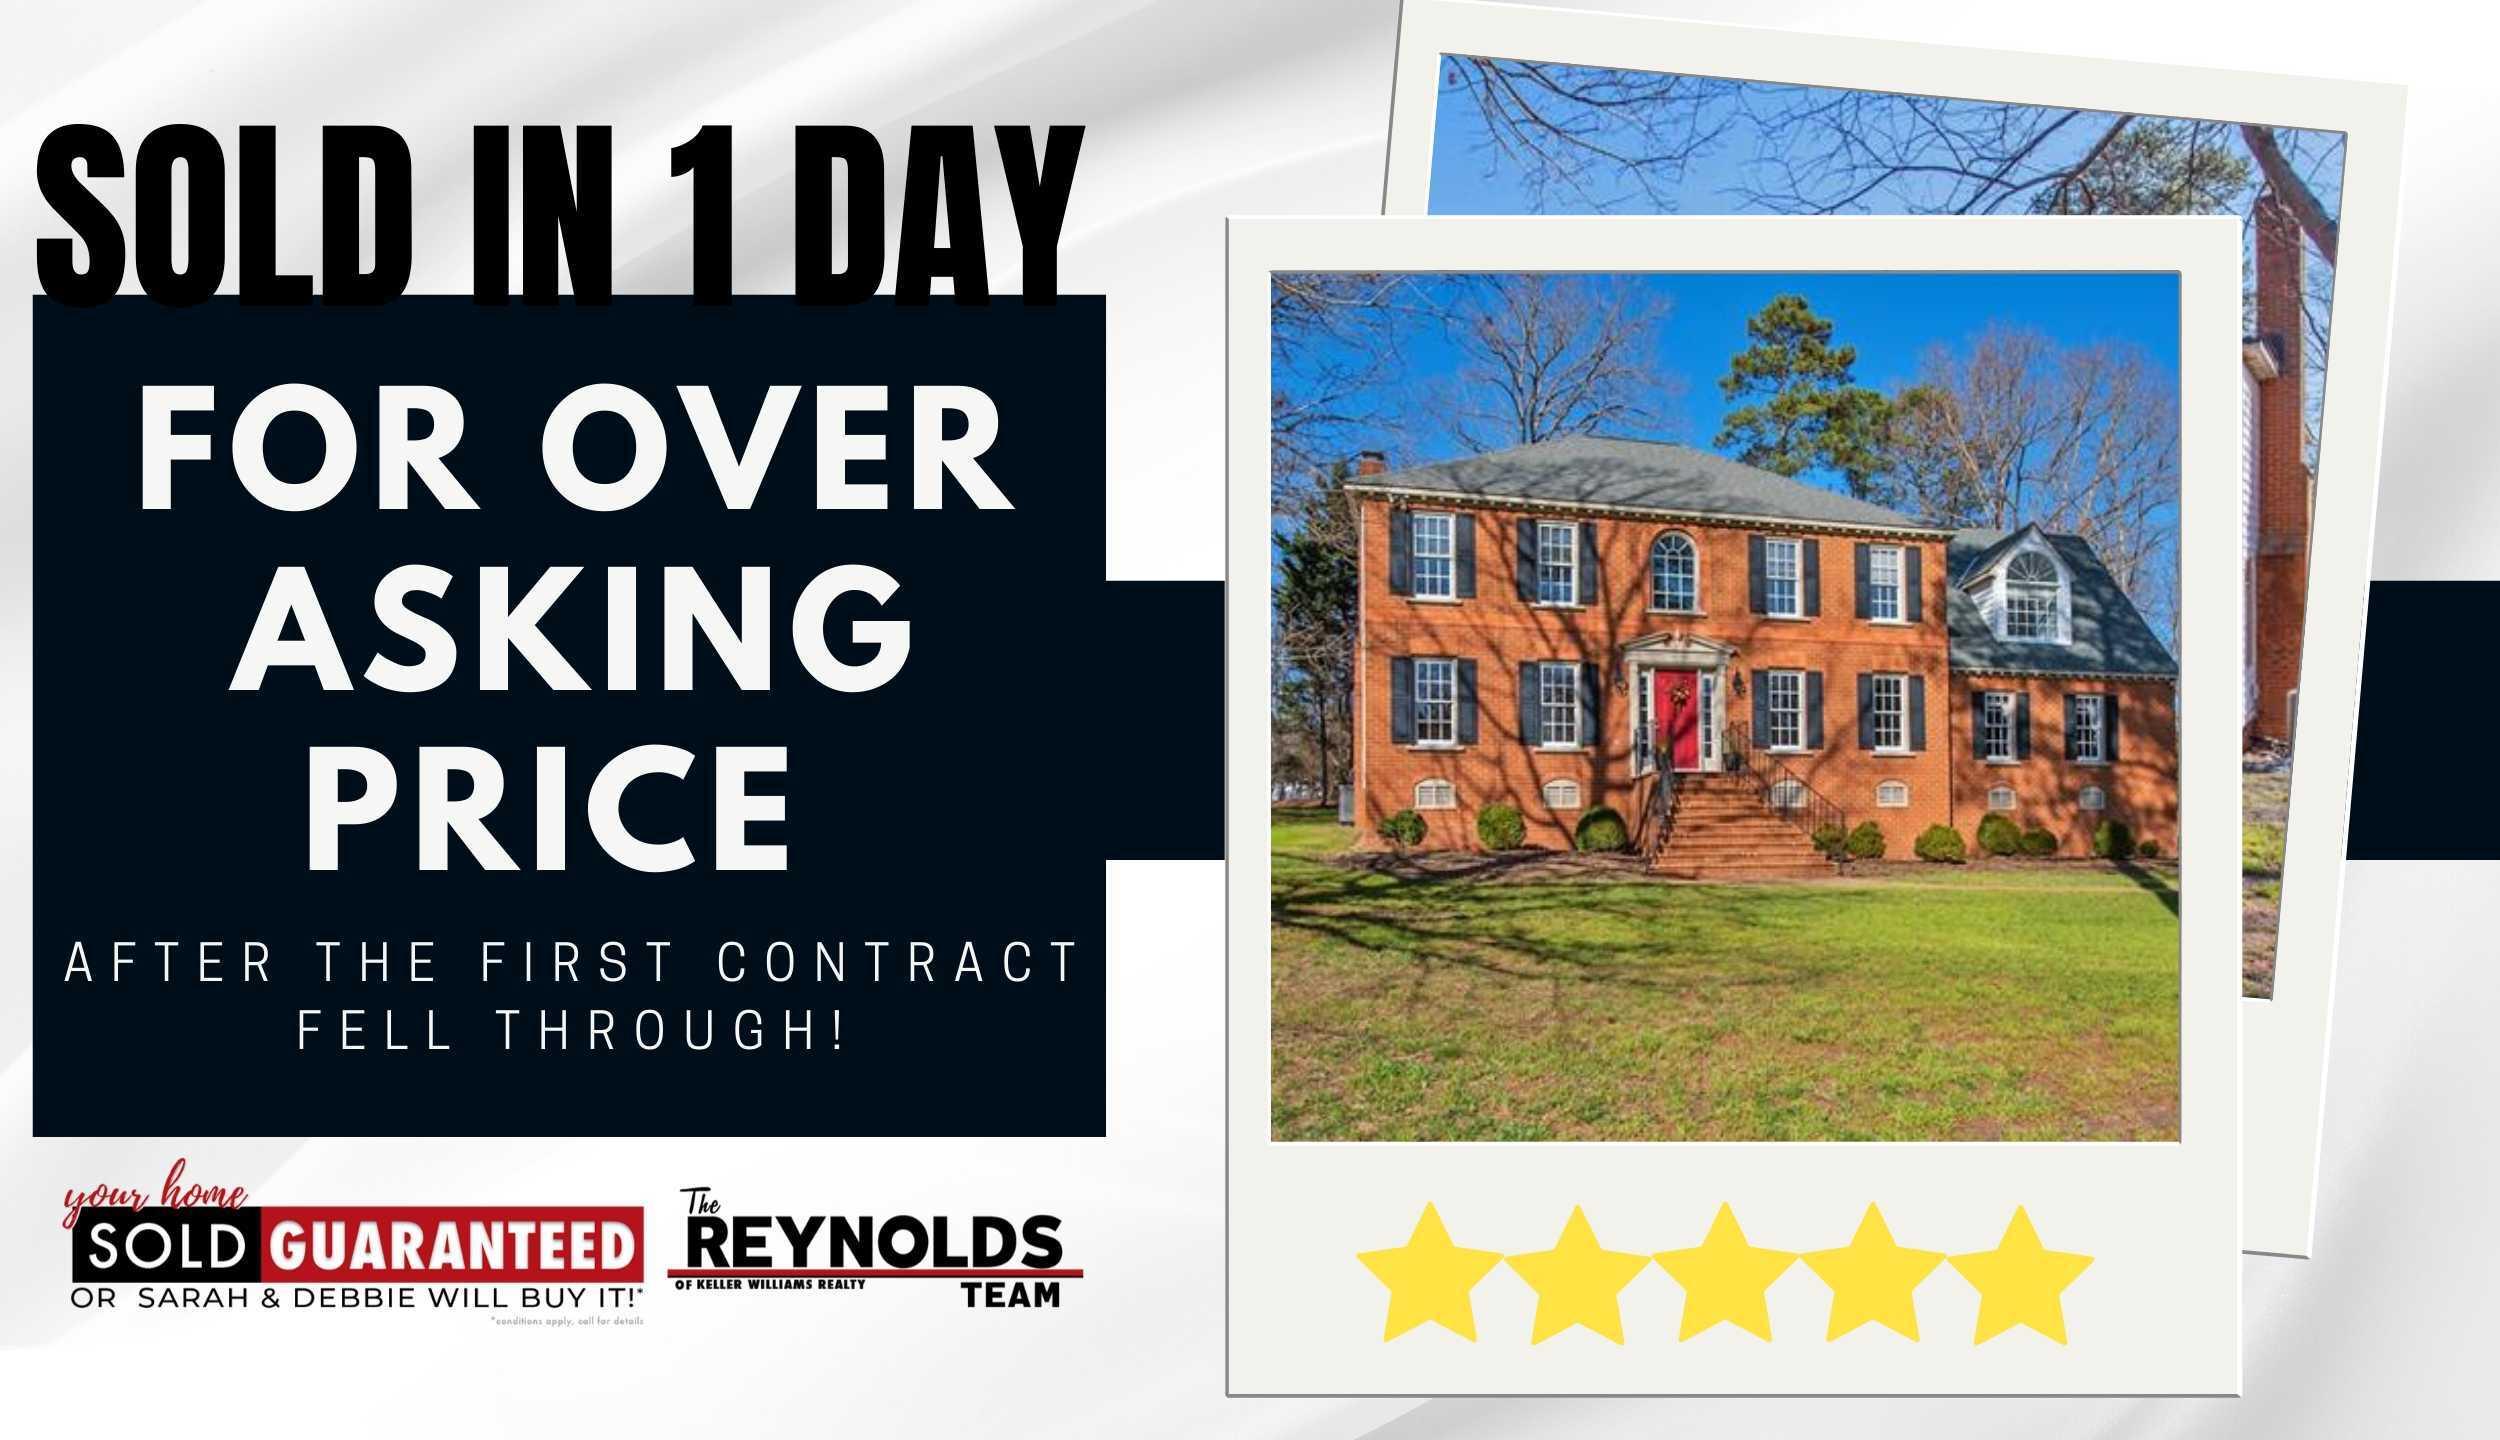 SOLD In 1 DAY For OVER ASKING PRICE After The First Contract Fell Through!